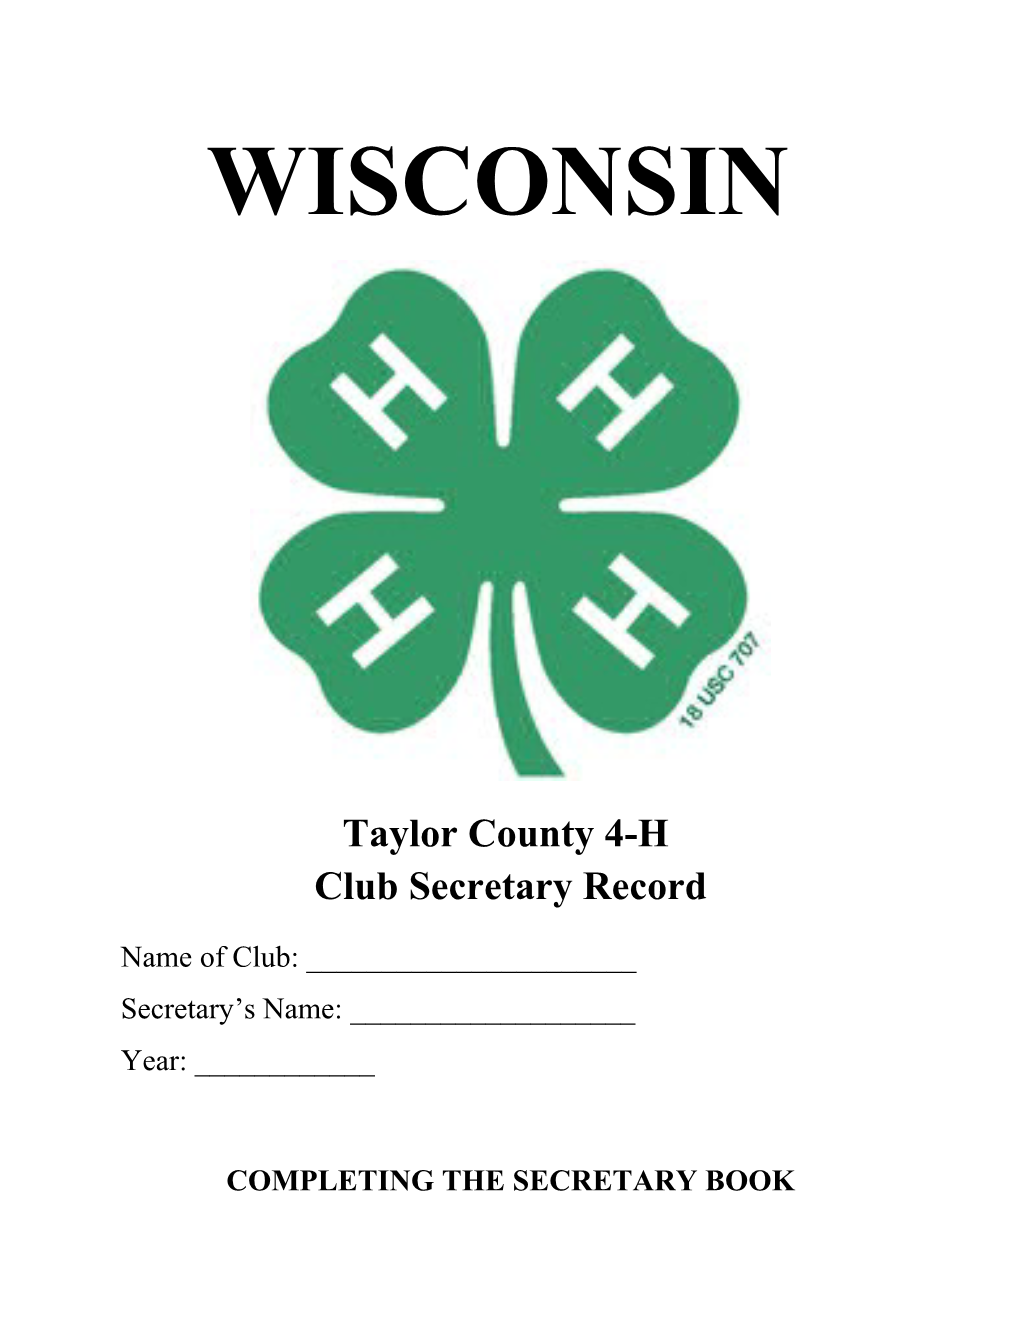 Taylor County 4-H